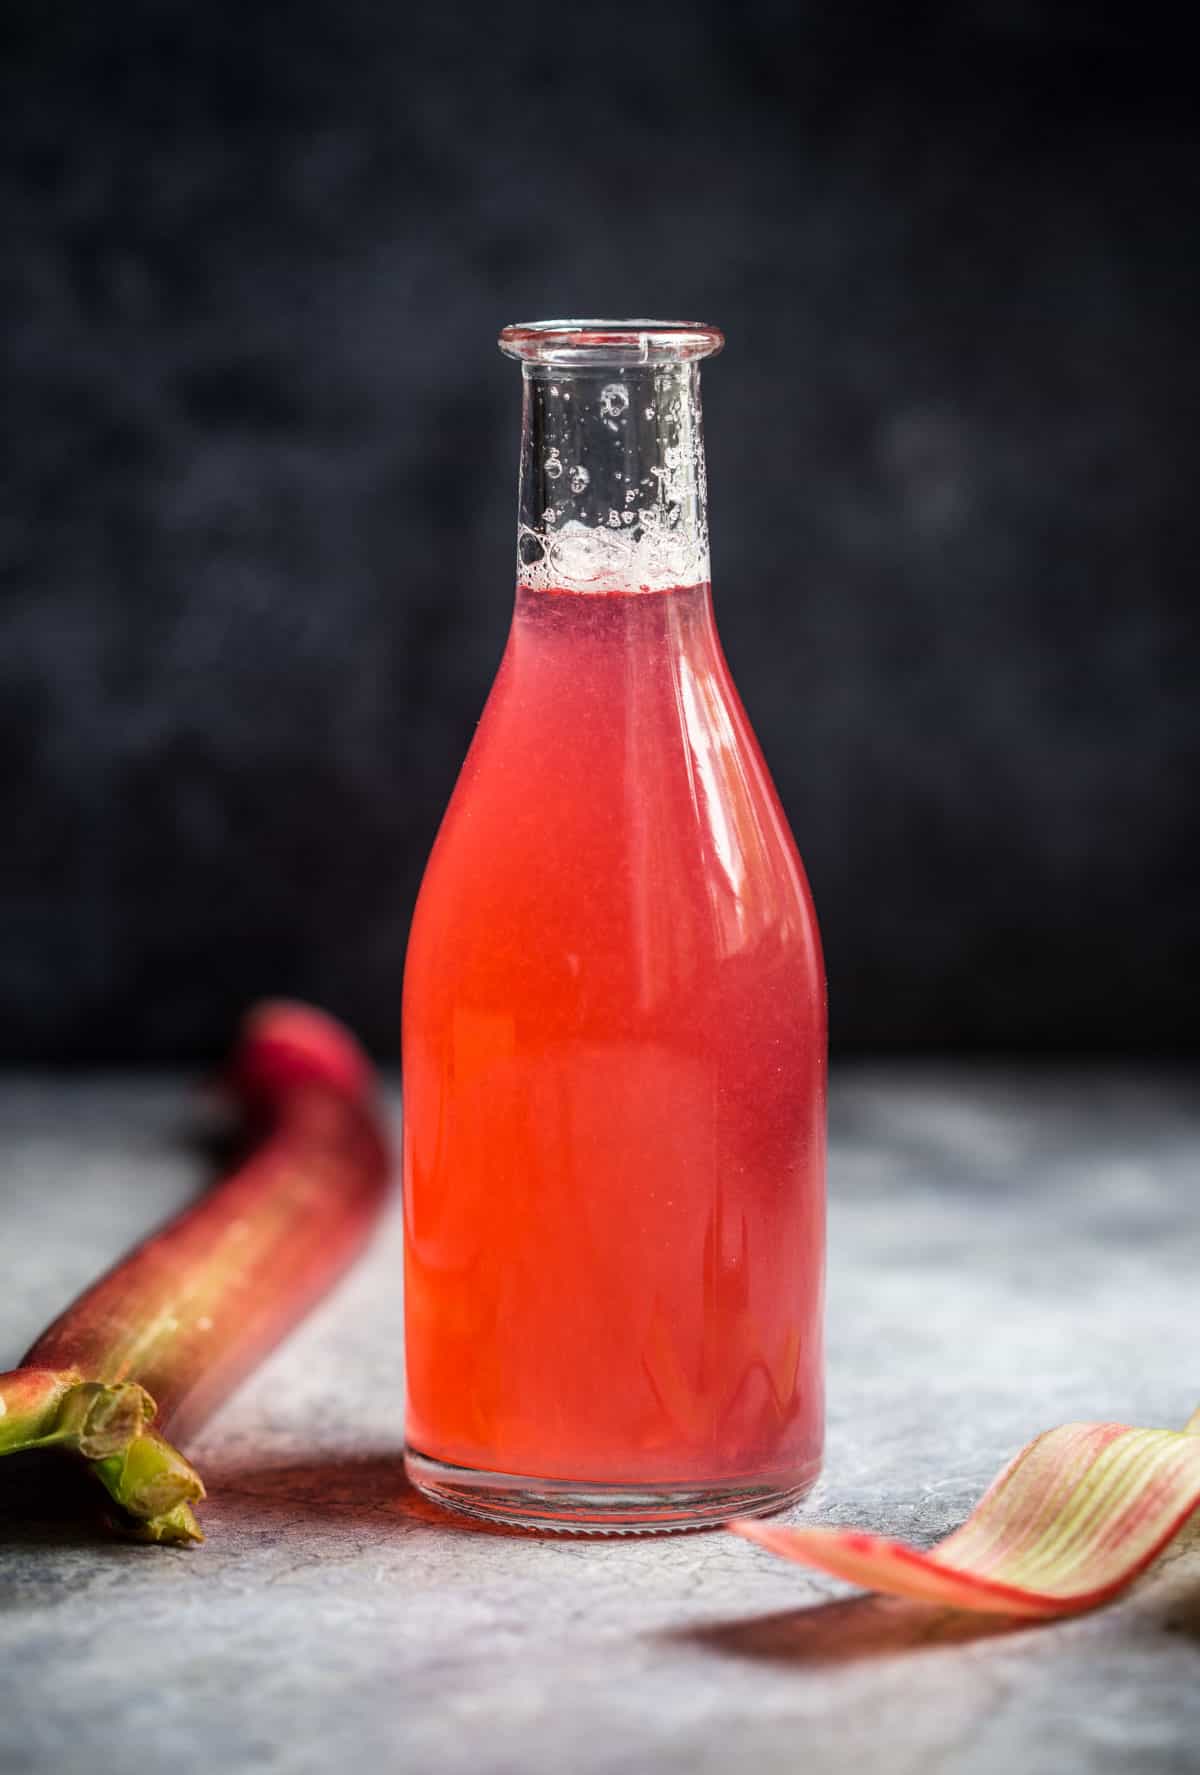 A bottle filled with Rhubarb simple syrup
